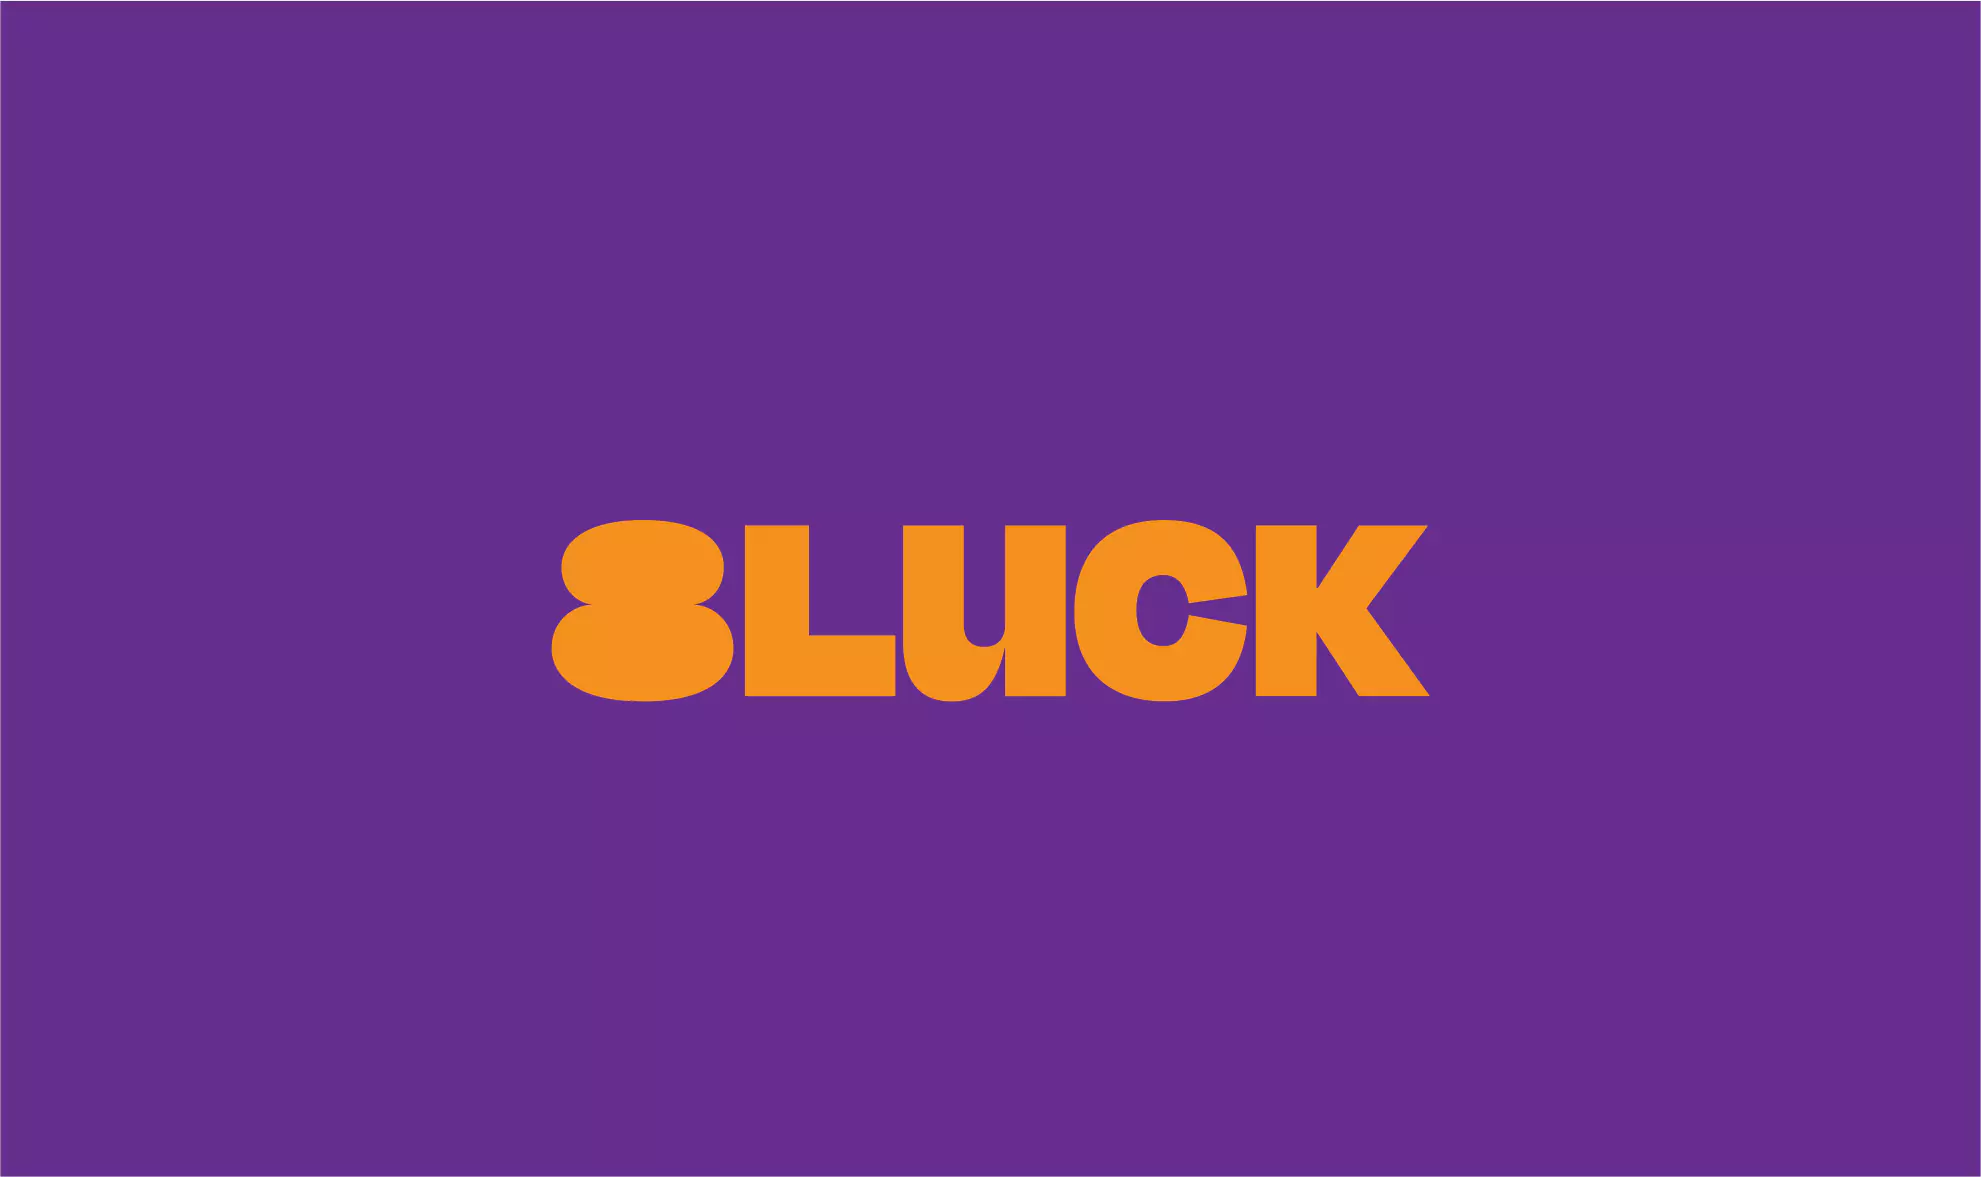 Visual Identity for 8luck - Logotype